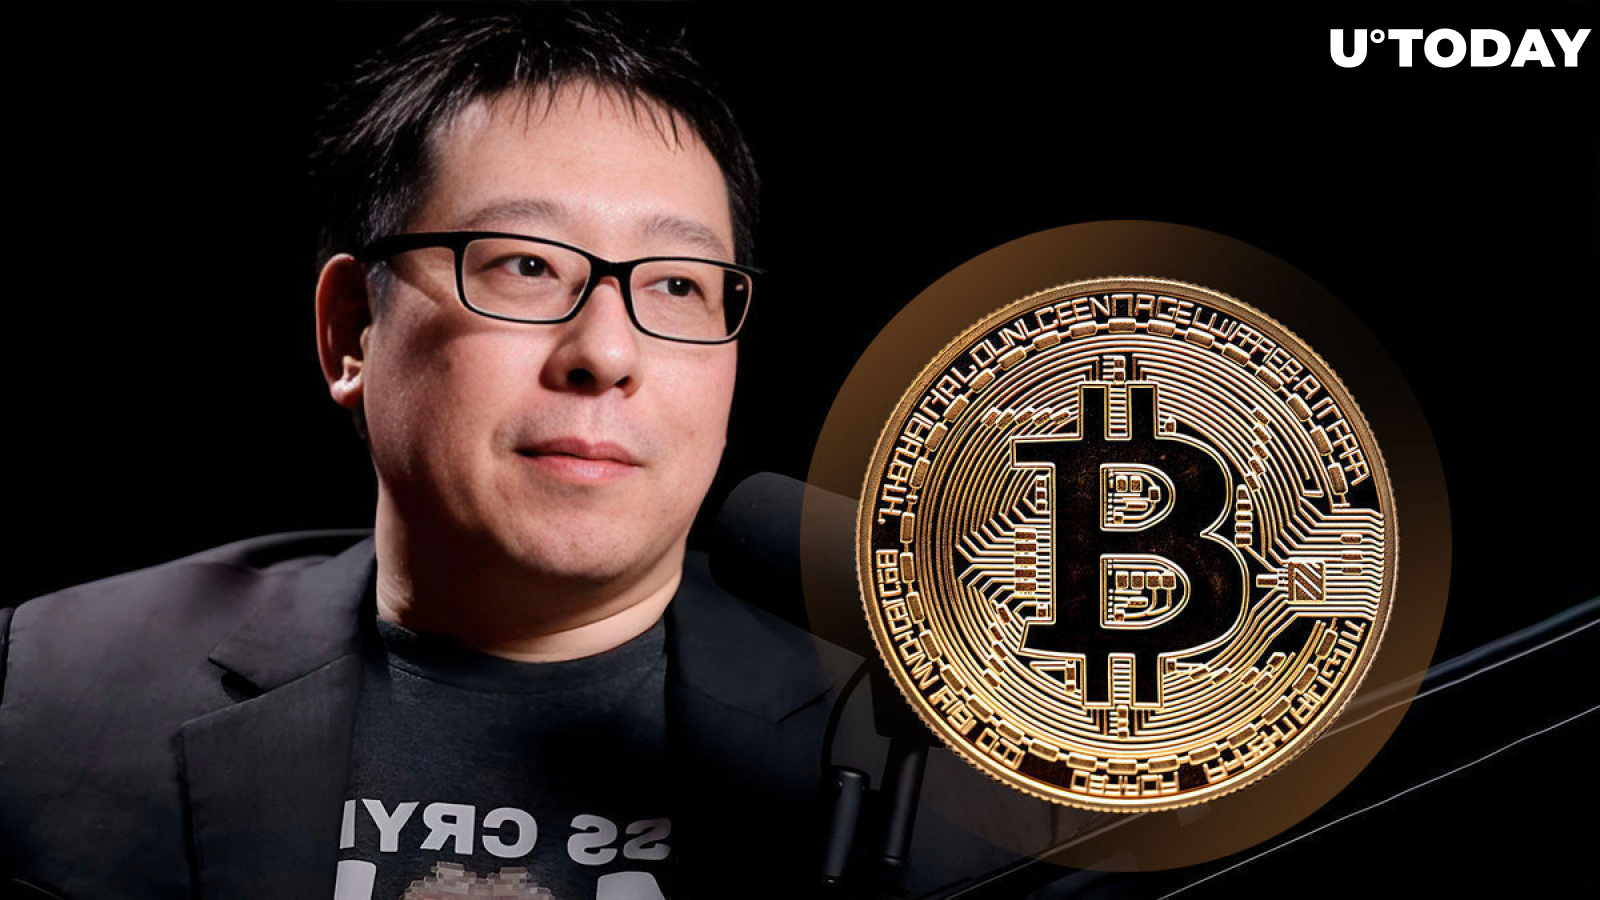 Bitcoin: Chances of Waking Up to $200,000 BTC Growing Higher – Samson Mow